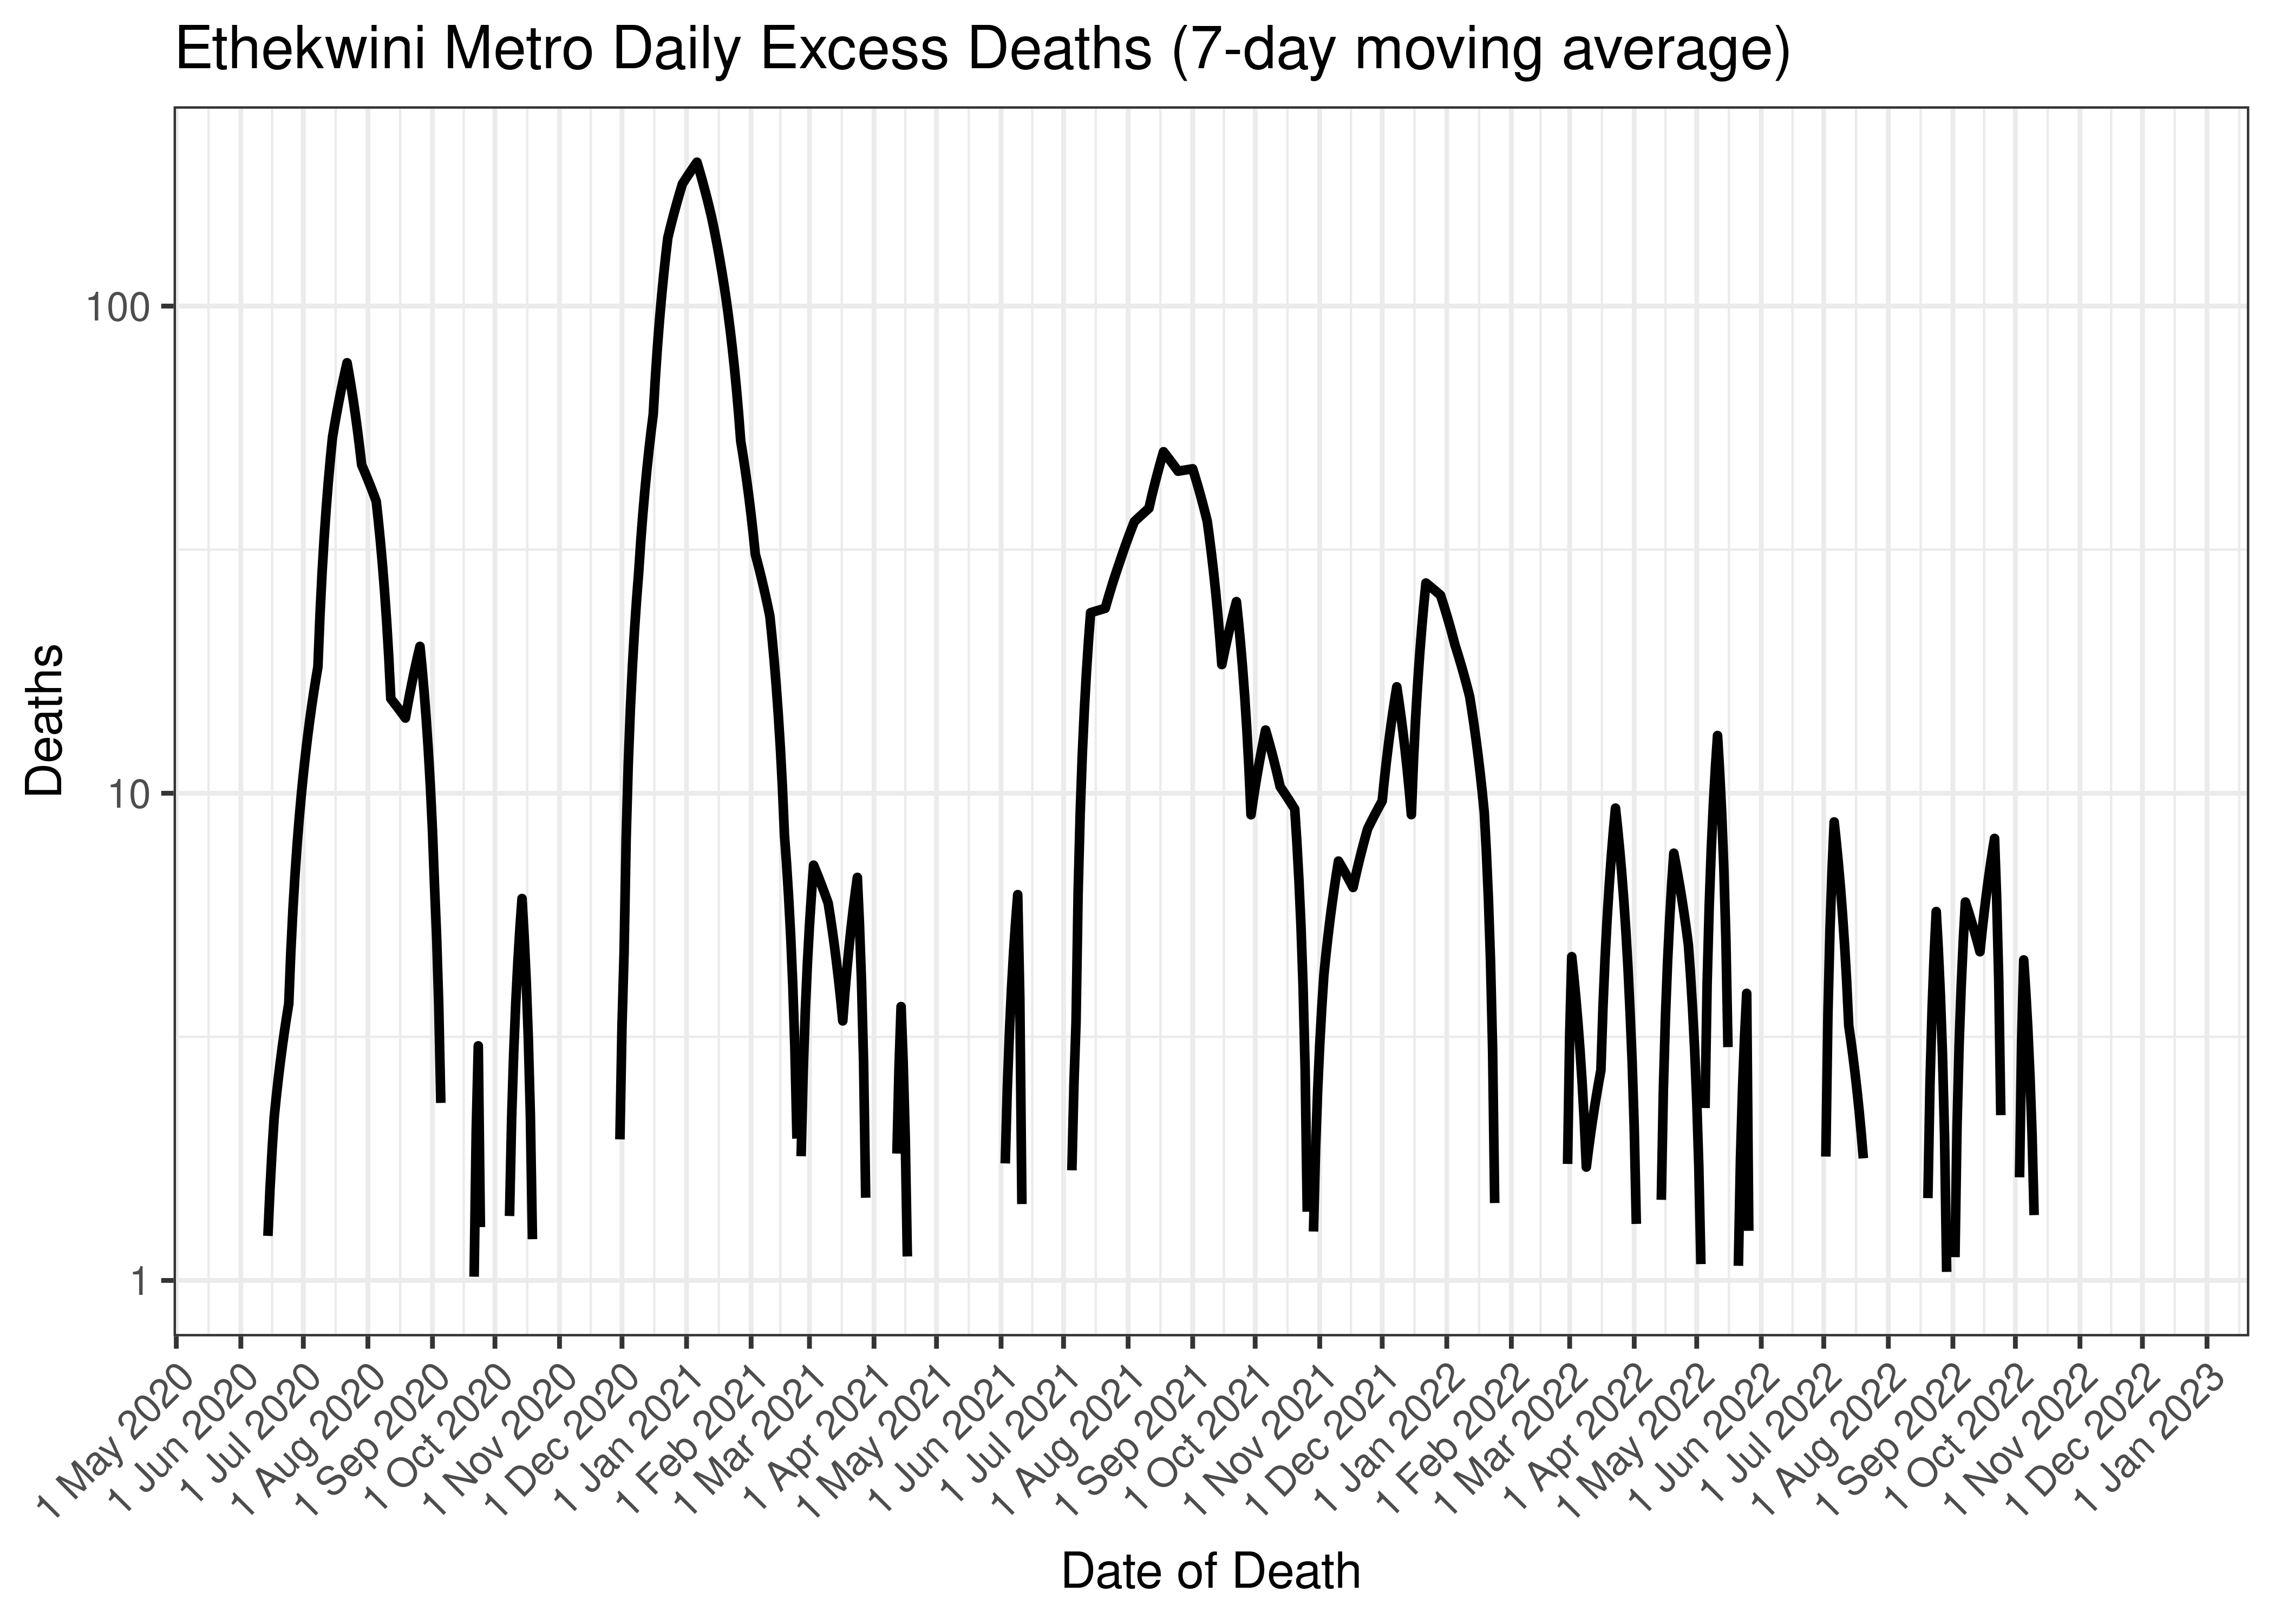 Ethekwini Metro Daily Excess Deaths (7-day moving average)